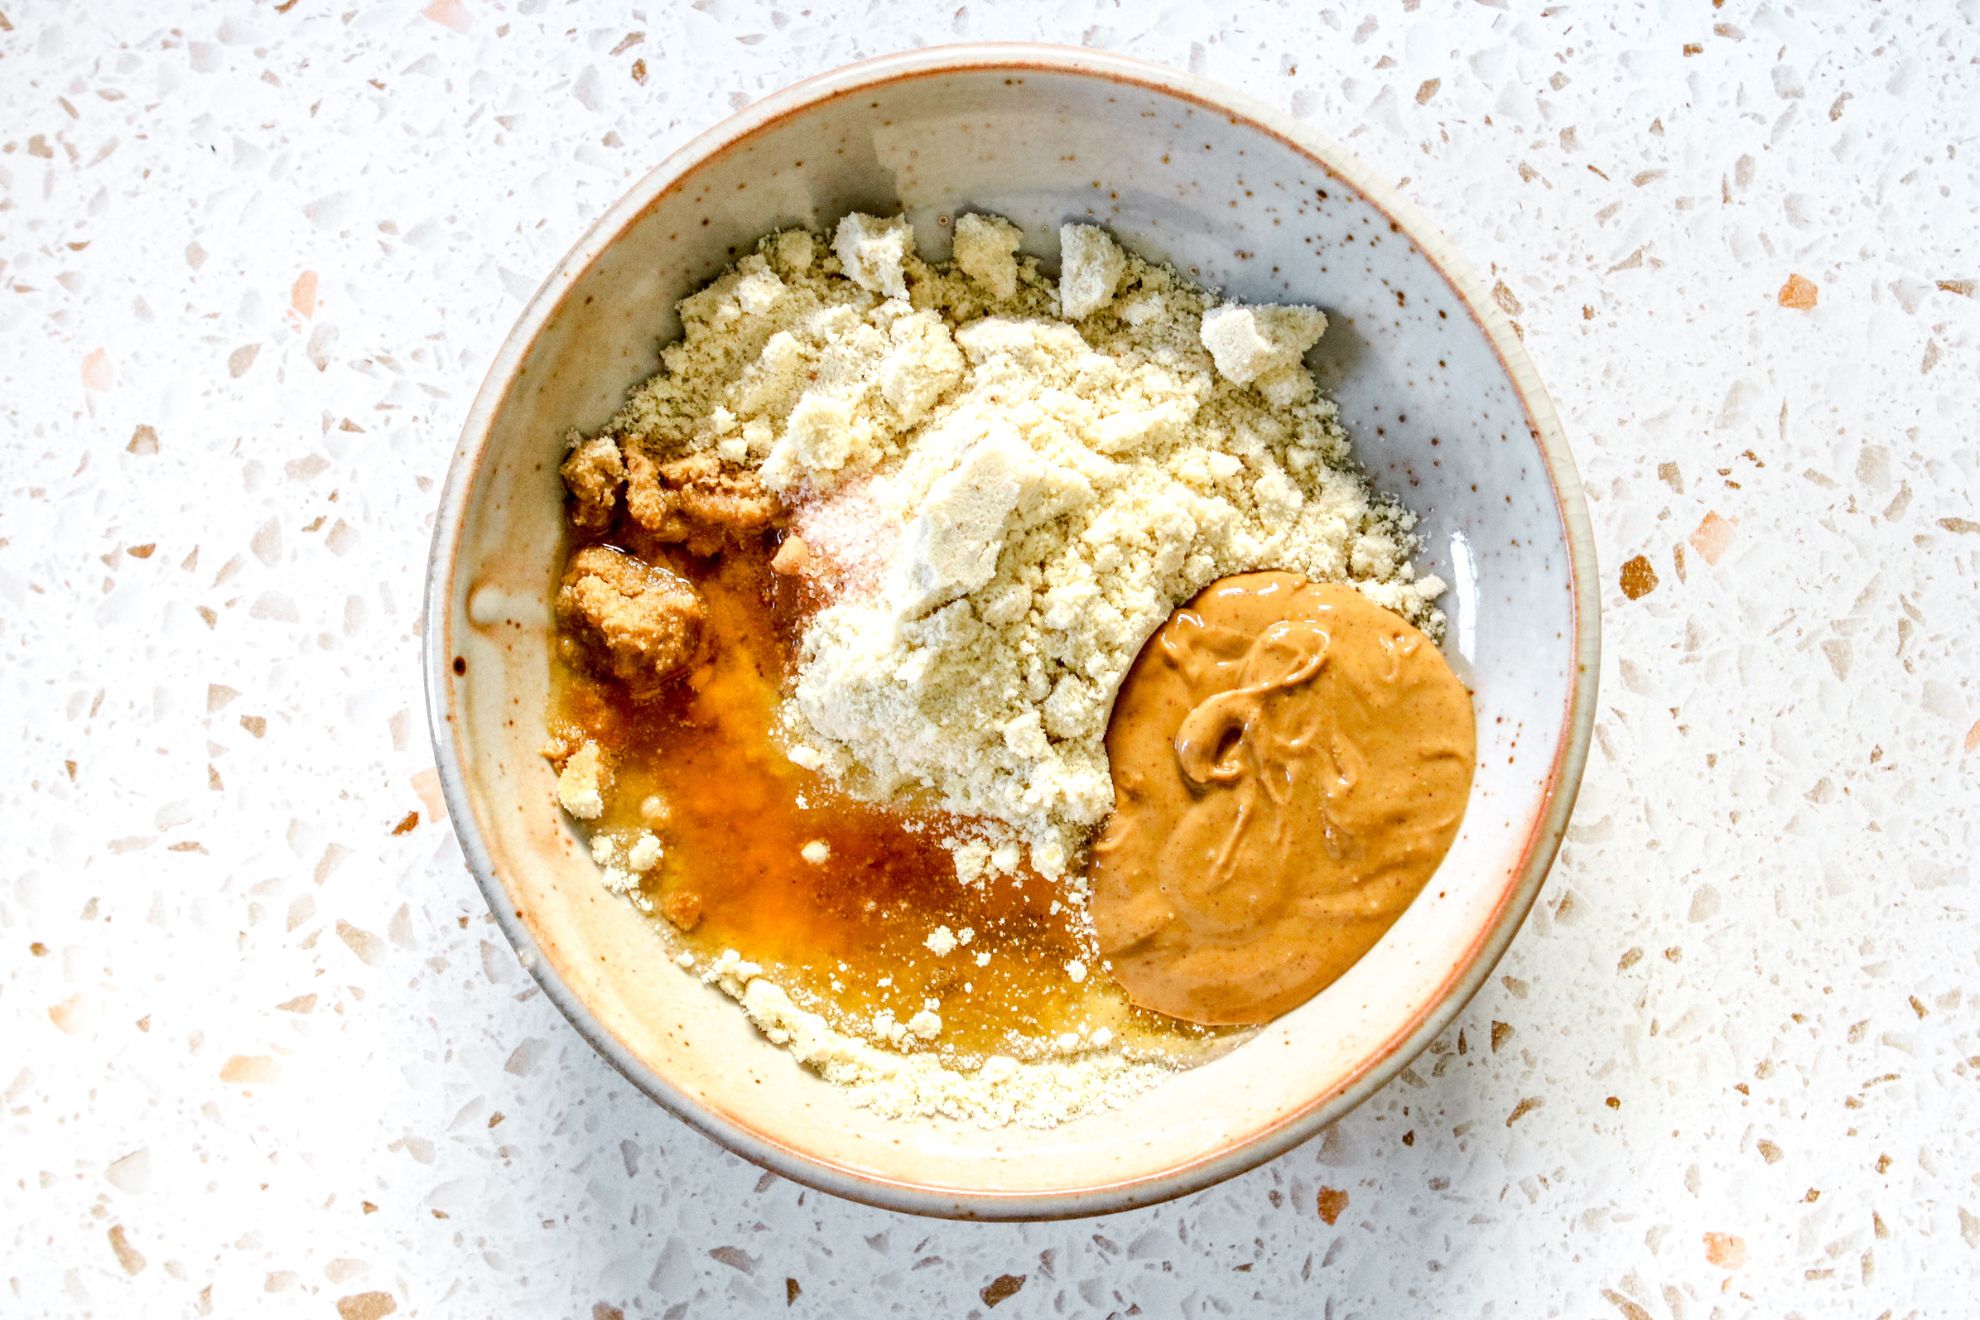 This is an overhead horizontal image of a bowl on a terrazzo surface. In the bowl is almond flour, peanut butter, agave nectar, salt, and vanilla extract.